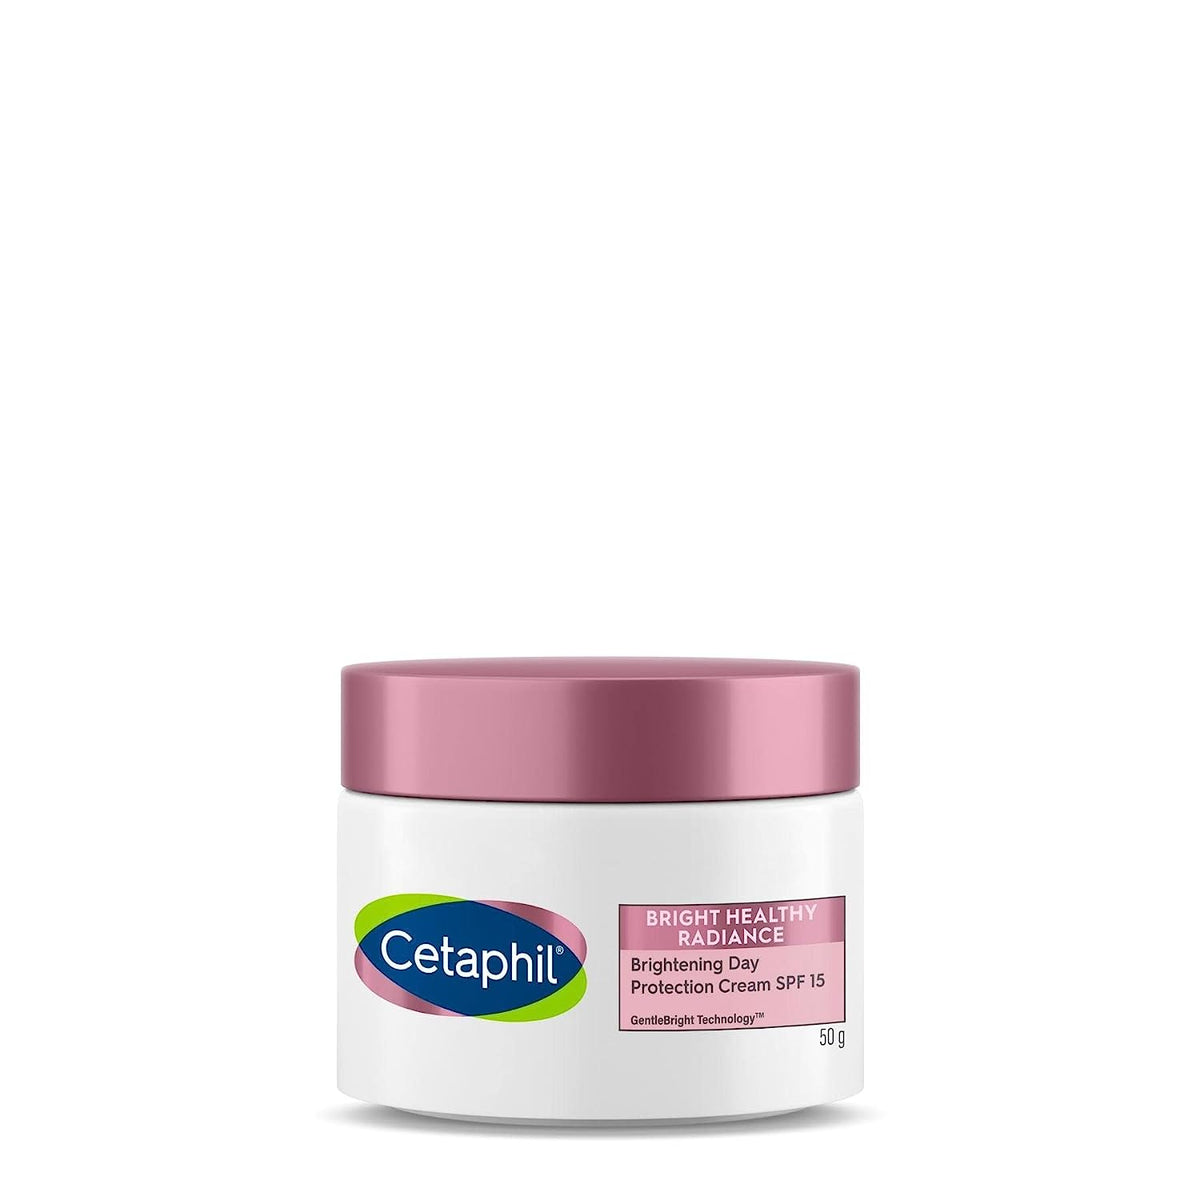 Cetaphil Bright Healthy Radiance Day Protection Cream spf15 - 50gm